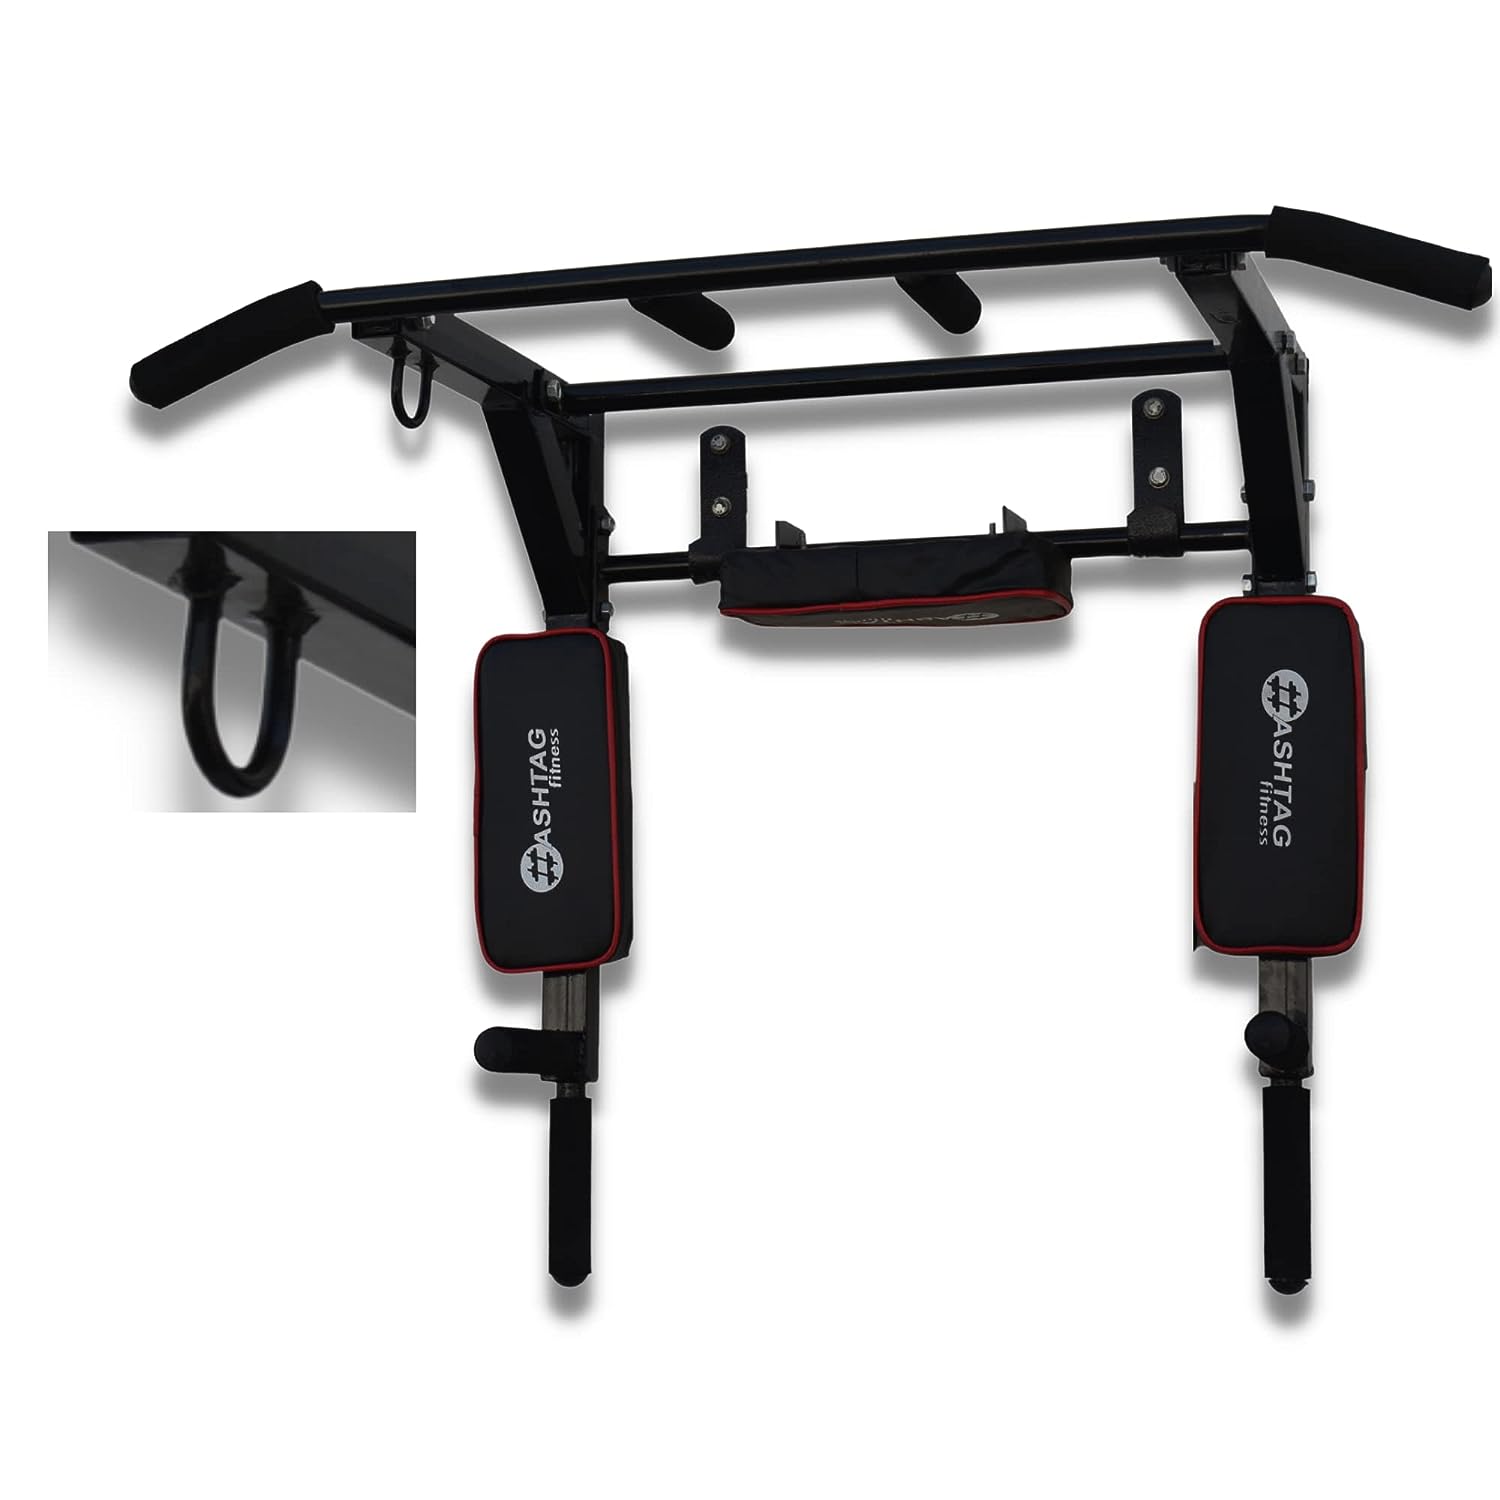 HASHTAG FITNESS Wall mount pull up bar, wall mount 3 in 1